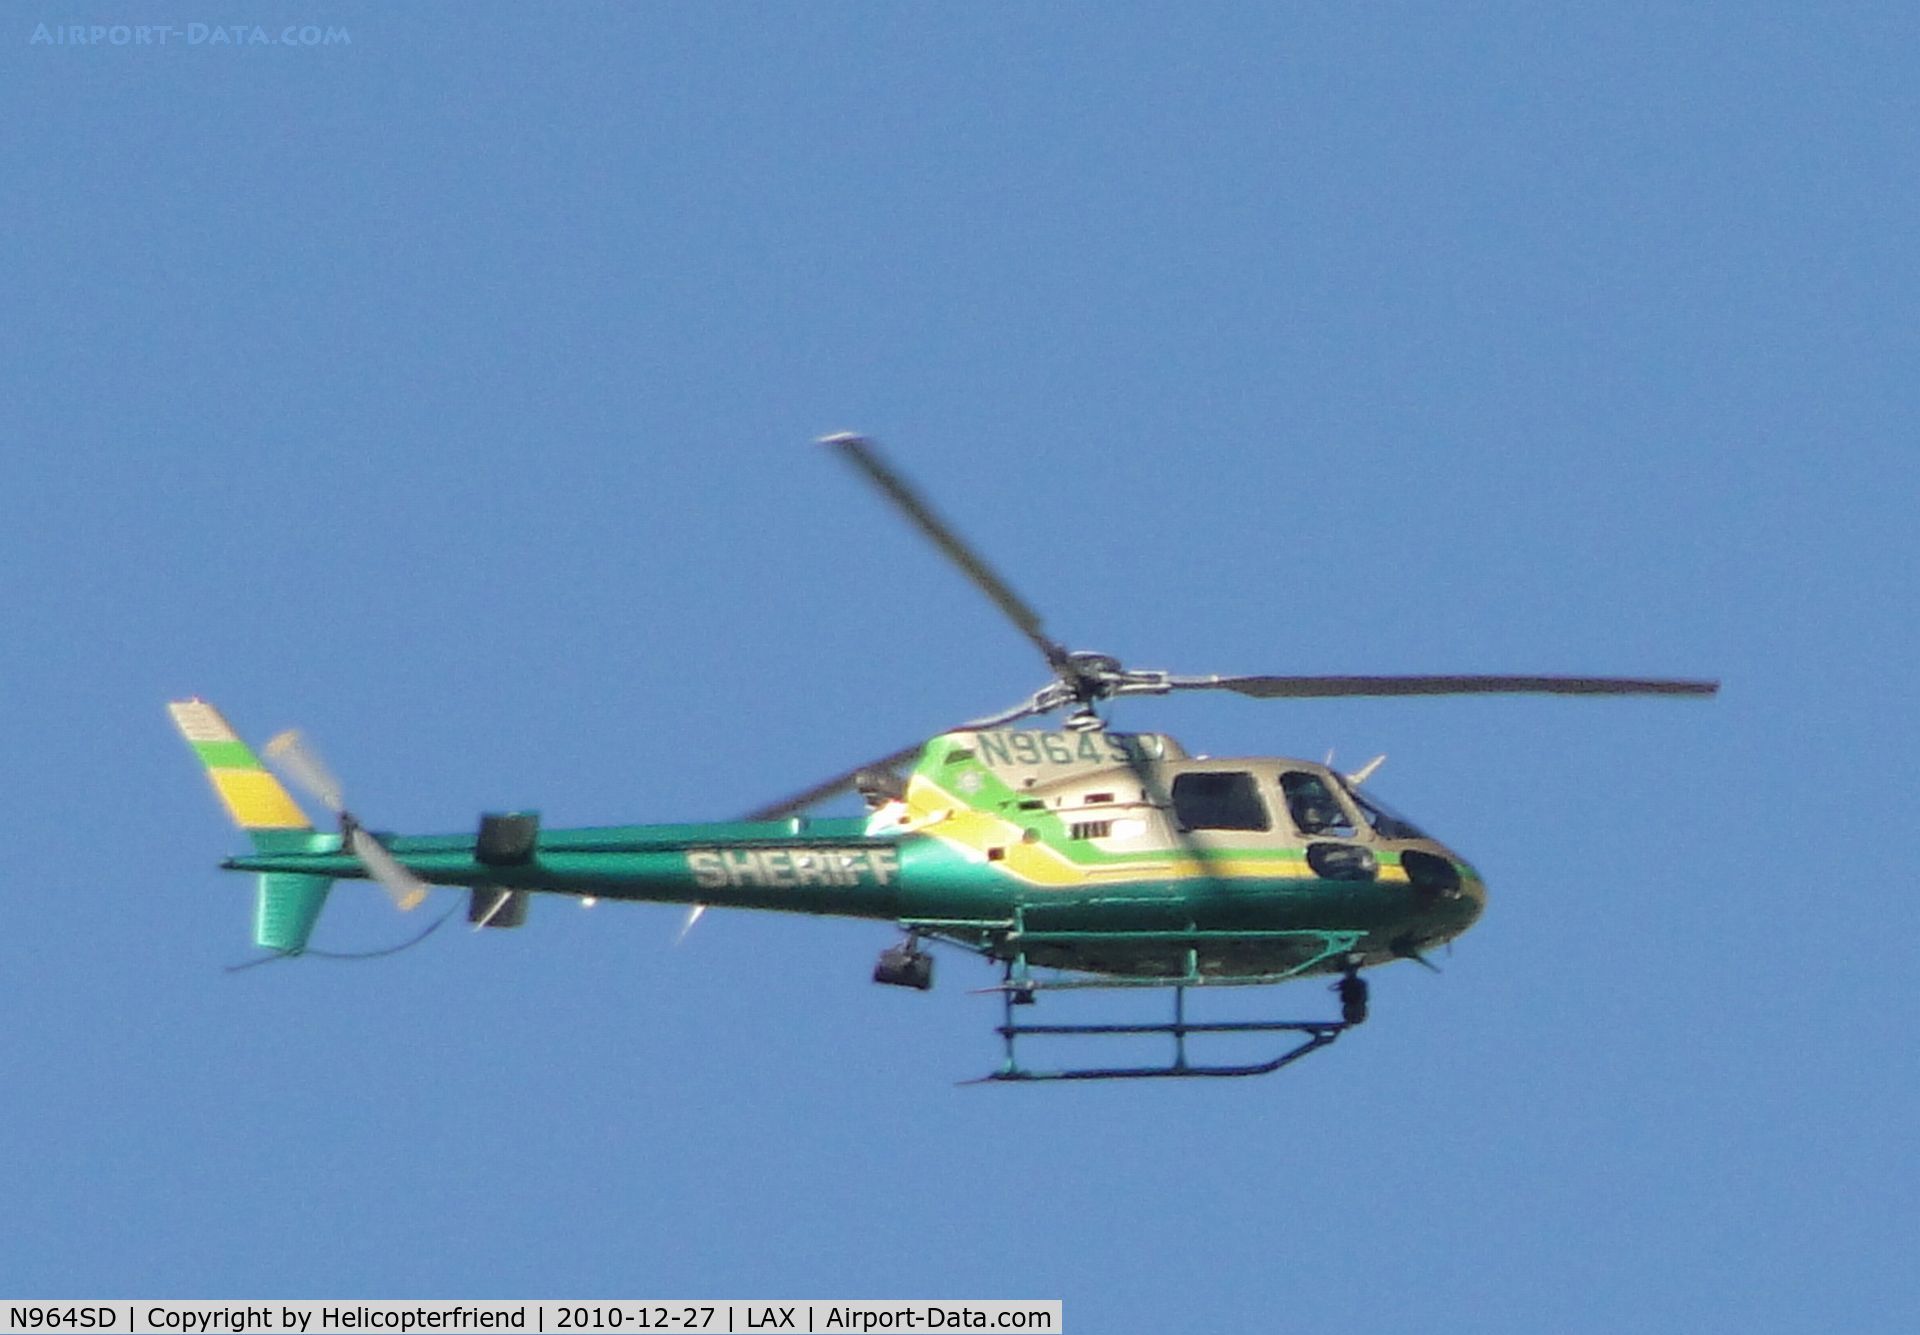 N964SD, Eurocopter AS-350B-2 Ecureuil Ecureuil C/N 3529, Orbiting in the City of Bell, California under inbound LAX flights